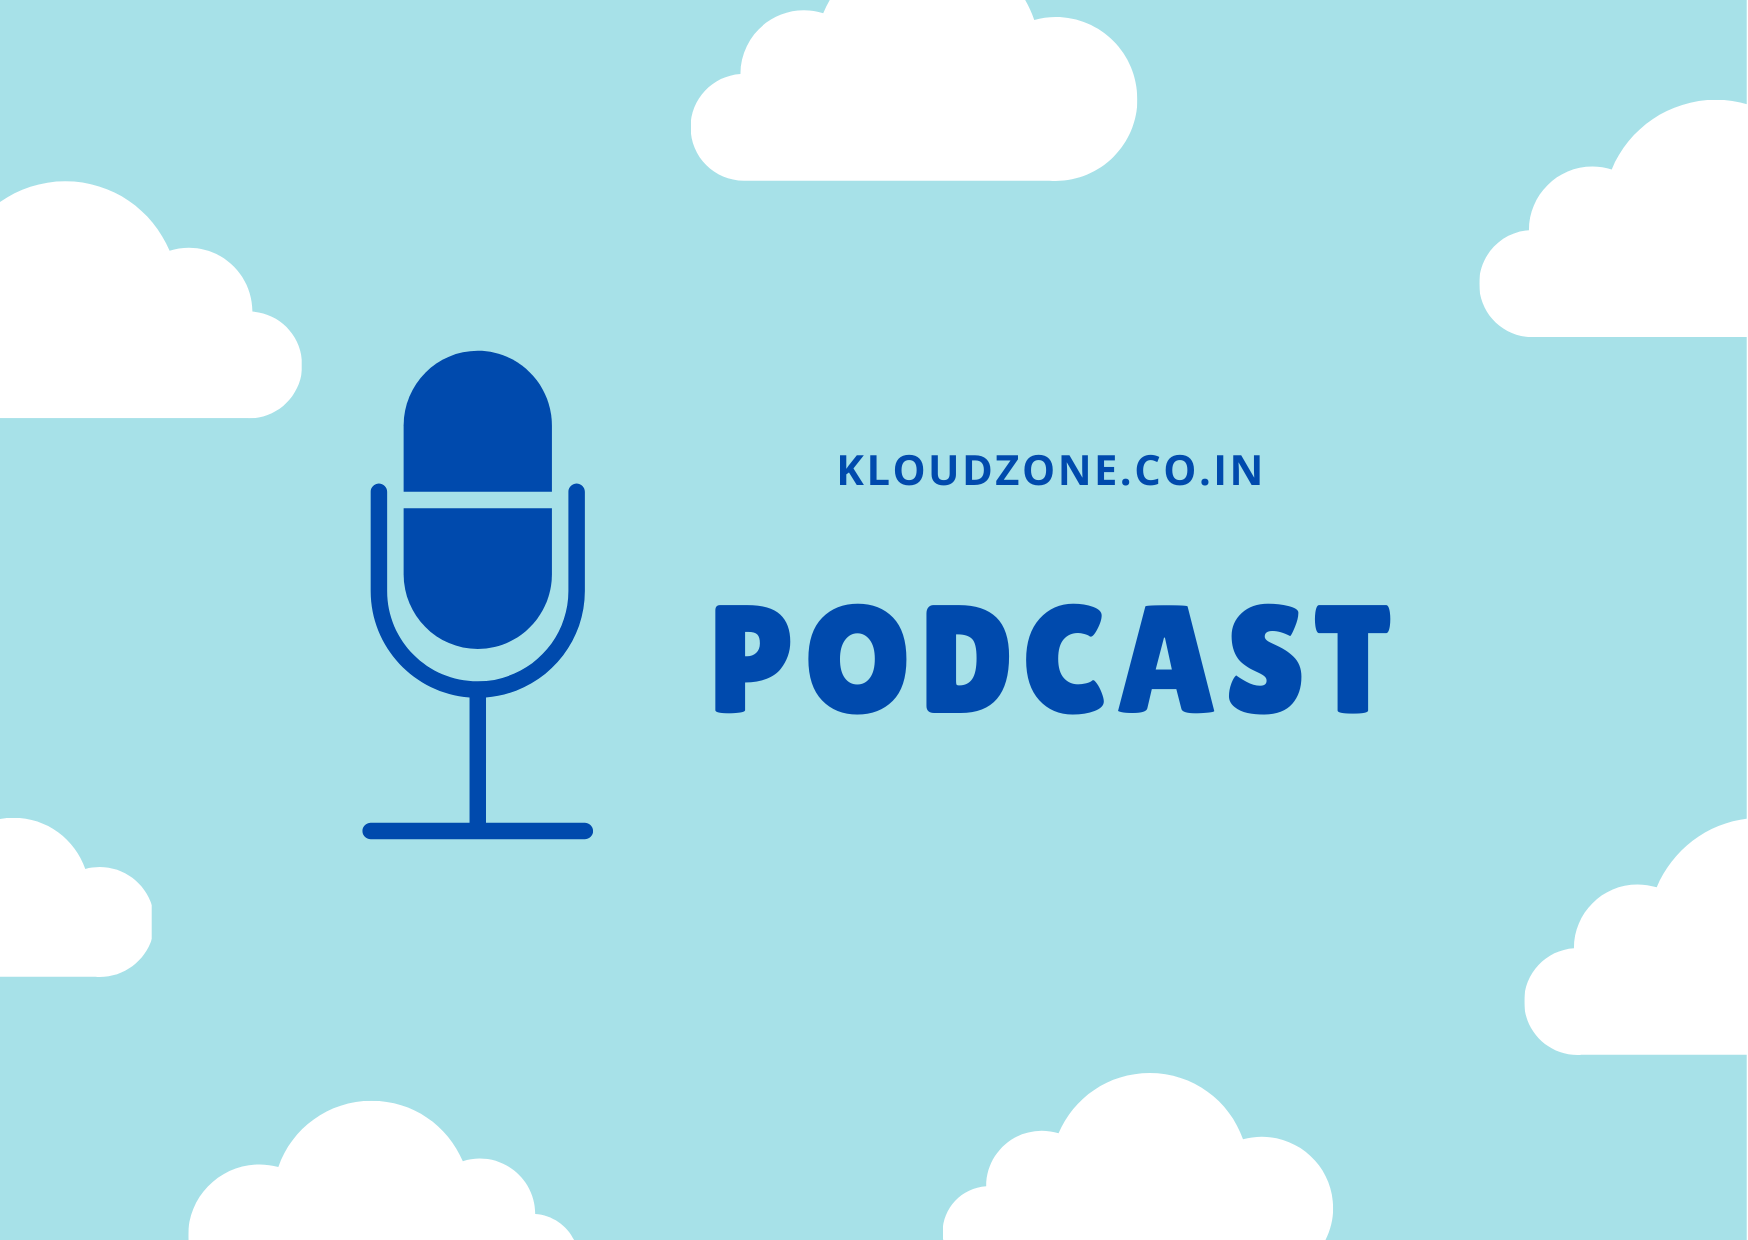 Hosting a Podcast about the Cloud Platform in collaboration with IBM and Aawaz.com